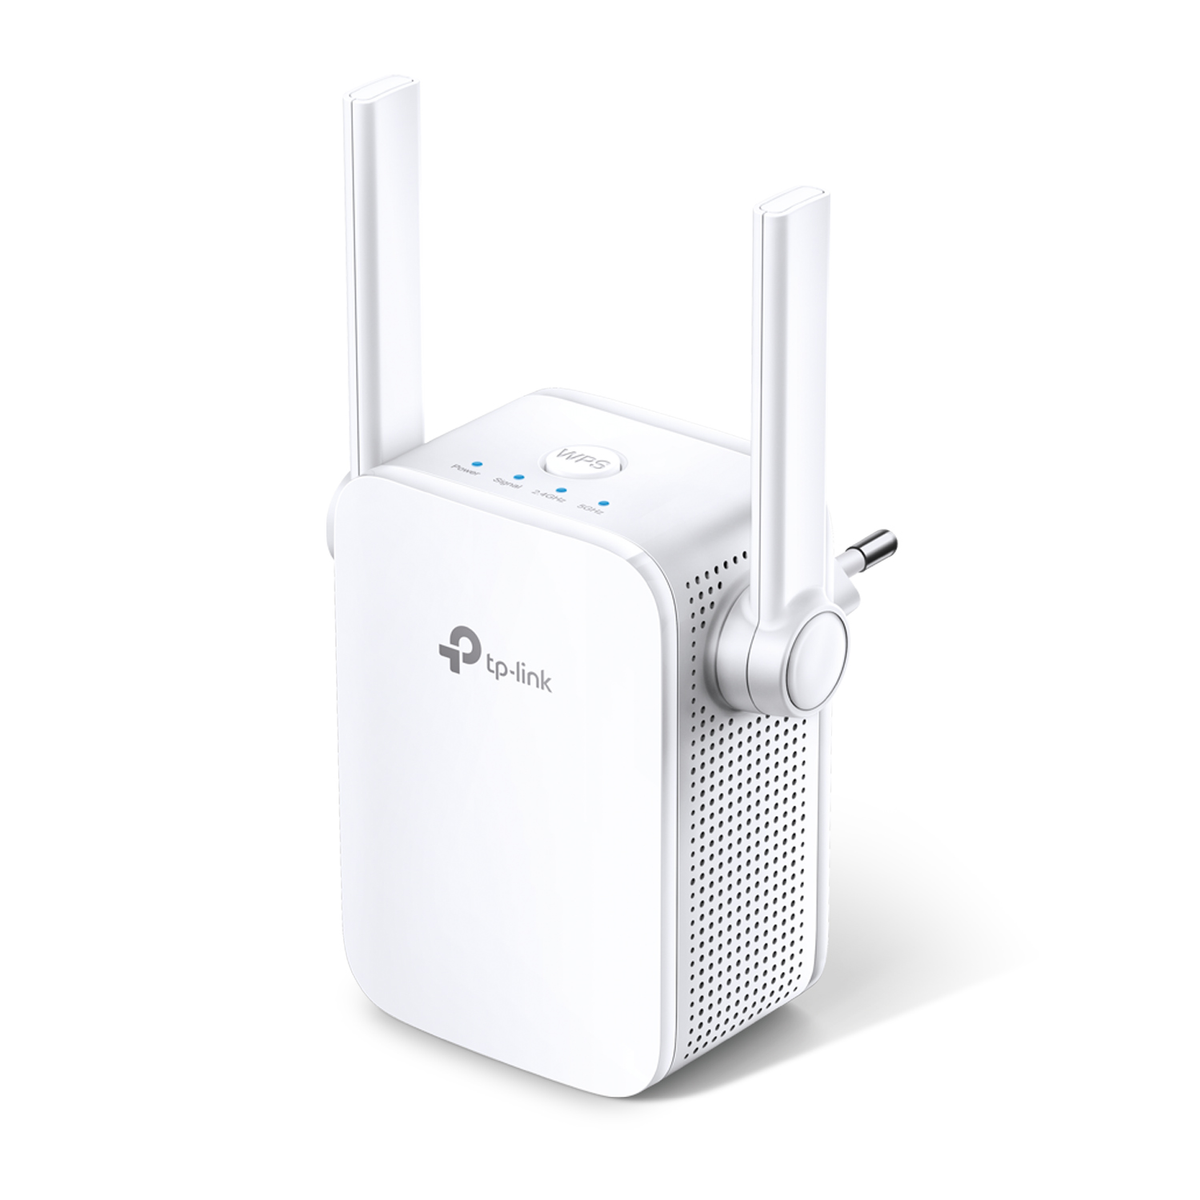 TP-LINK RE305 AC1200 DUALBAND WLAN WLAN Repeater REPEATER